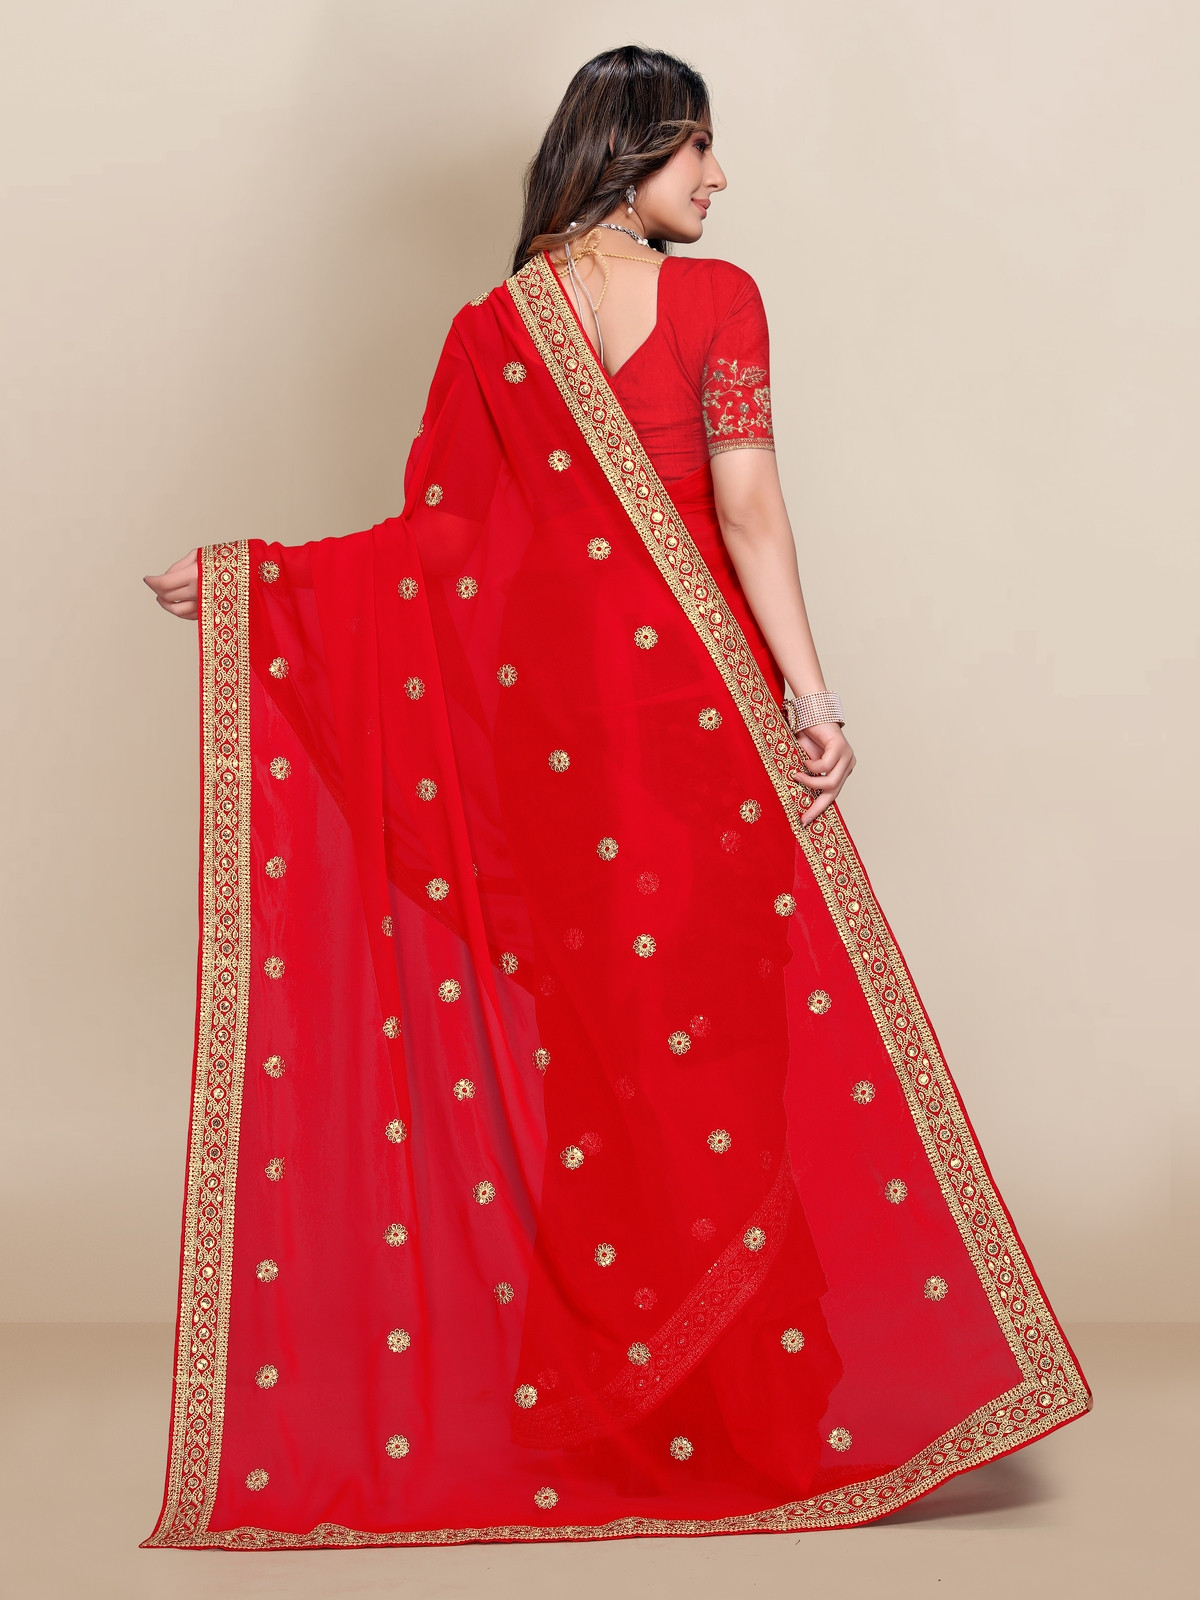 Blooming Georgette Embroidery Saree with lace border - Red